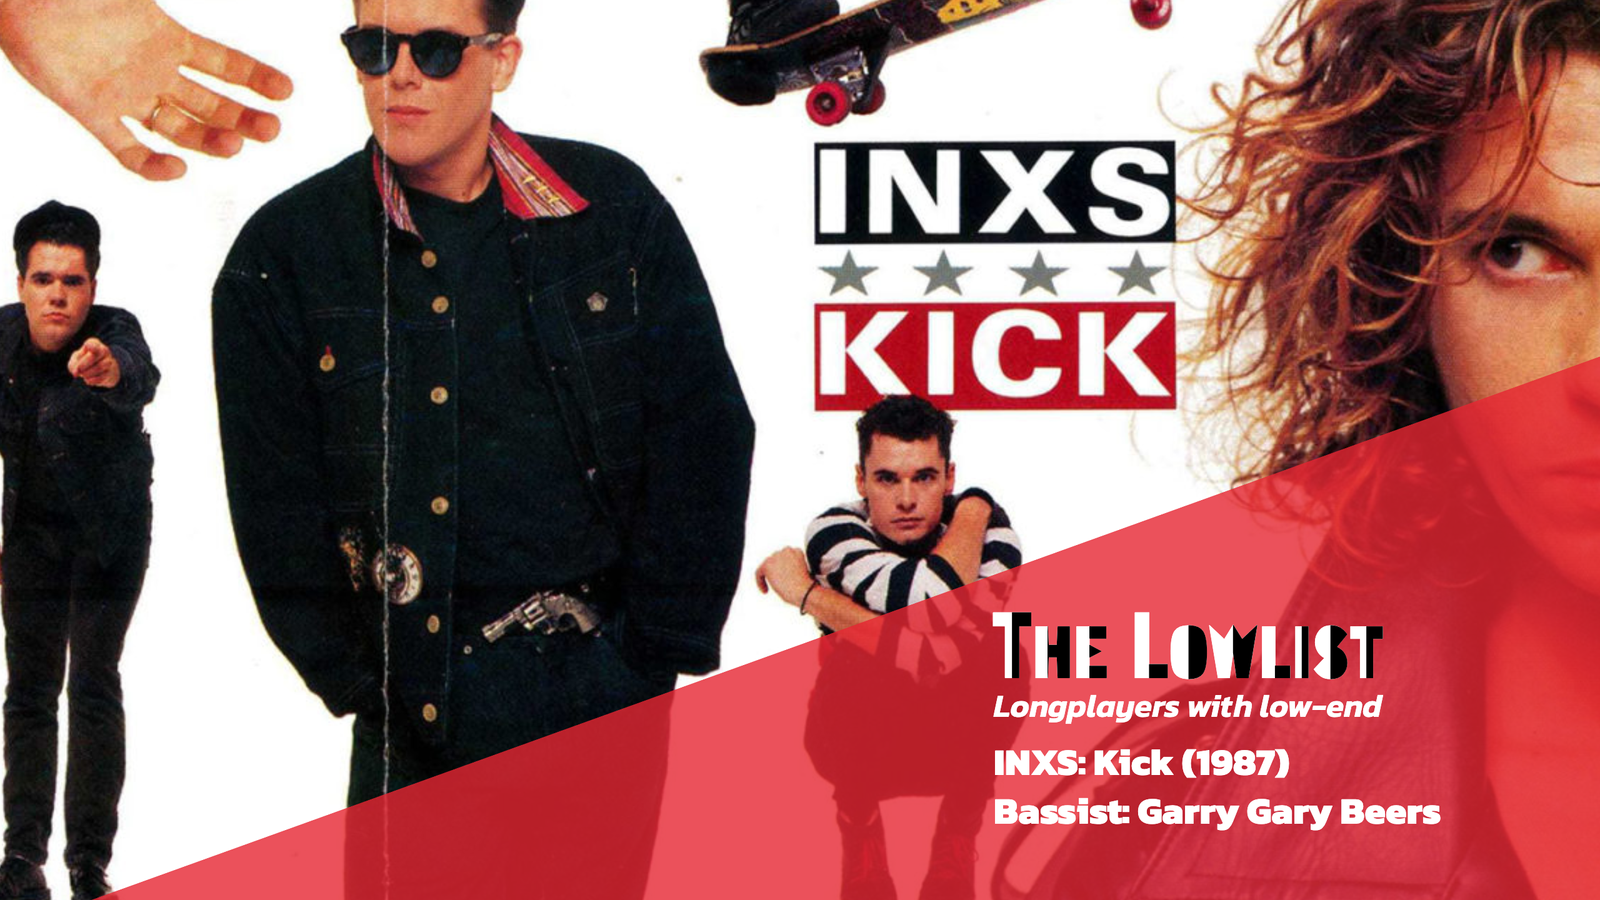 The Lowlist: INXS’s Kick was the sound of a rock band taking on novel technology